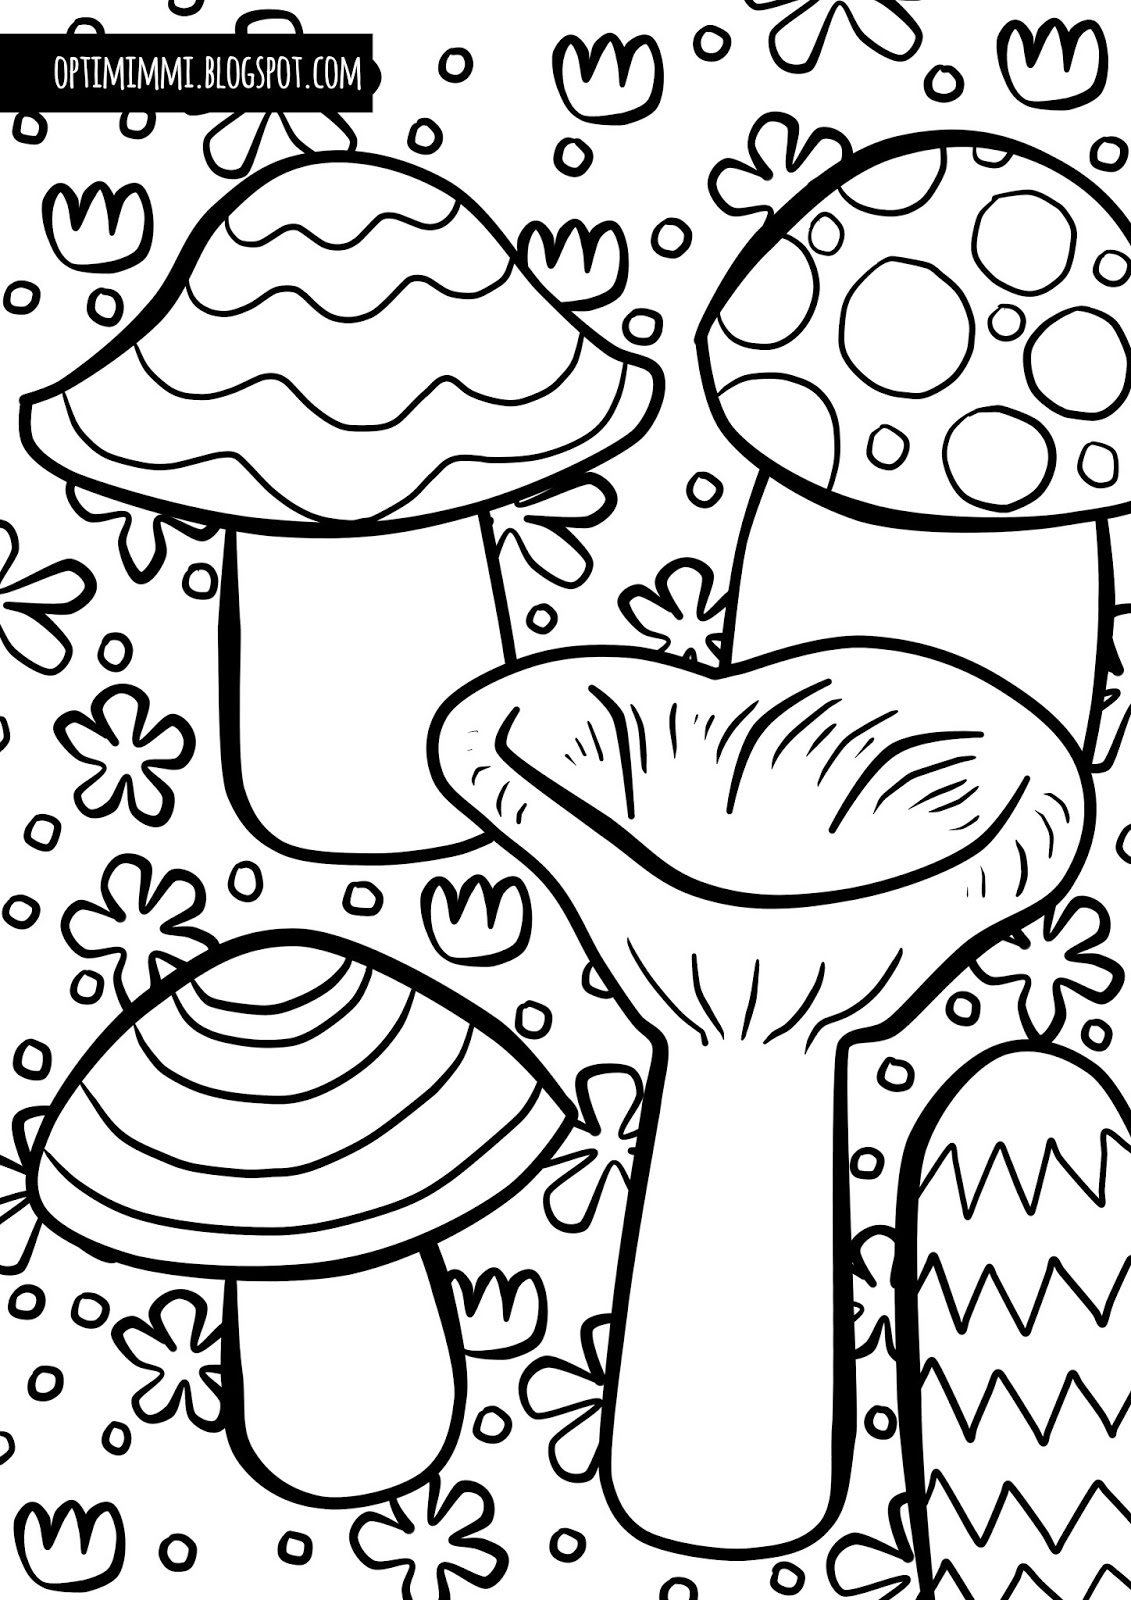 printable-coloring-pages-mushrooms